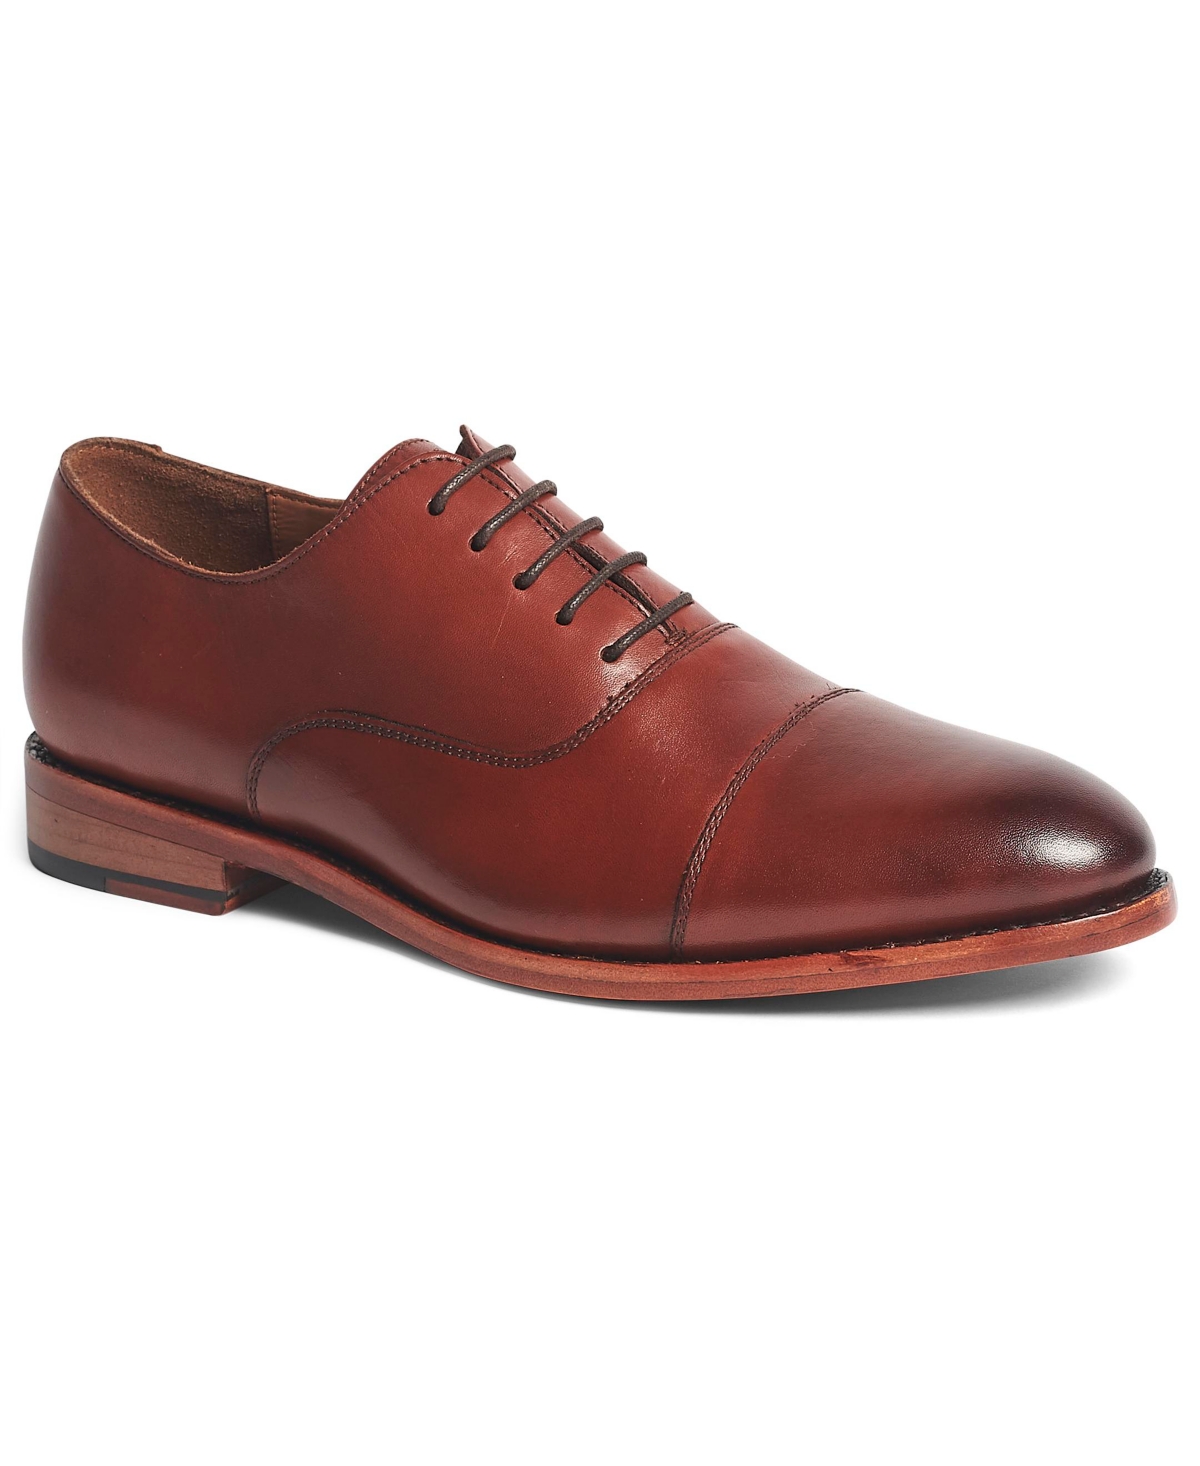 Anthony Veer Men's Clinton Cap-toe Oxford Leather Dress Shoes Men's Shoes In Mahogany